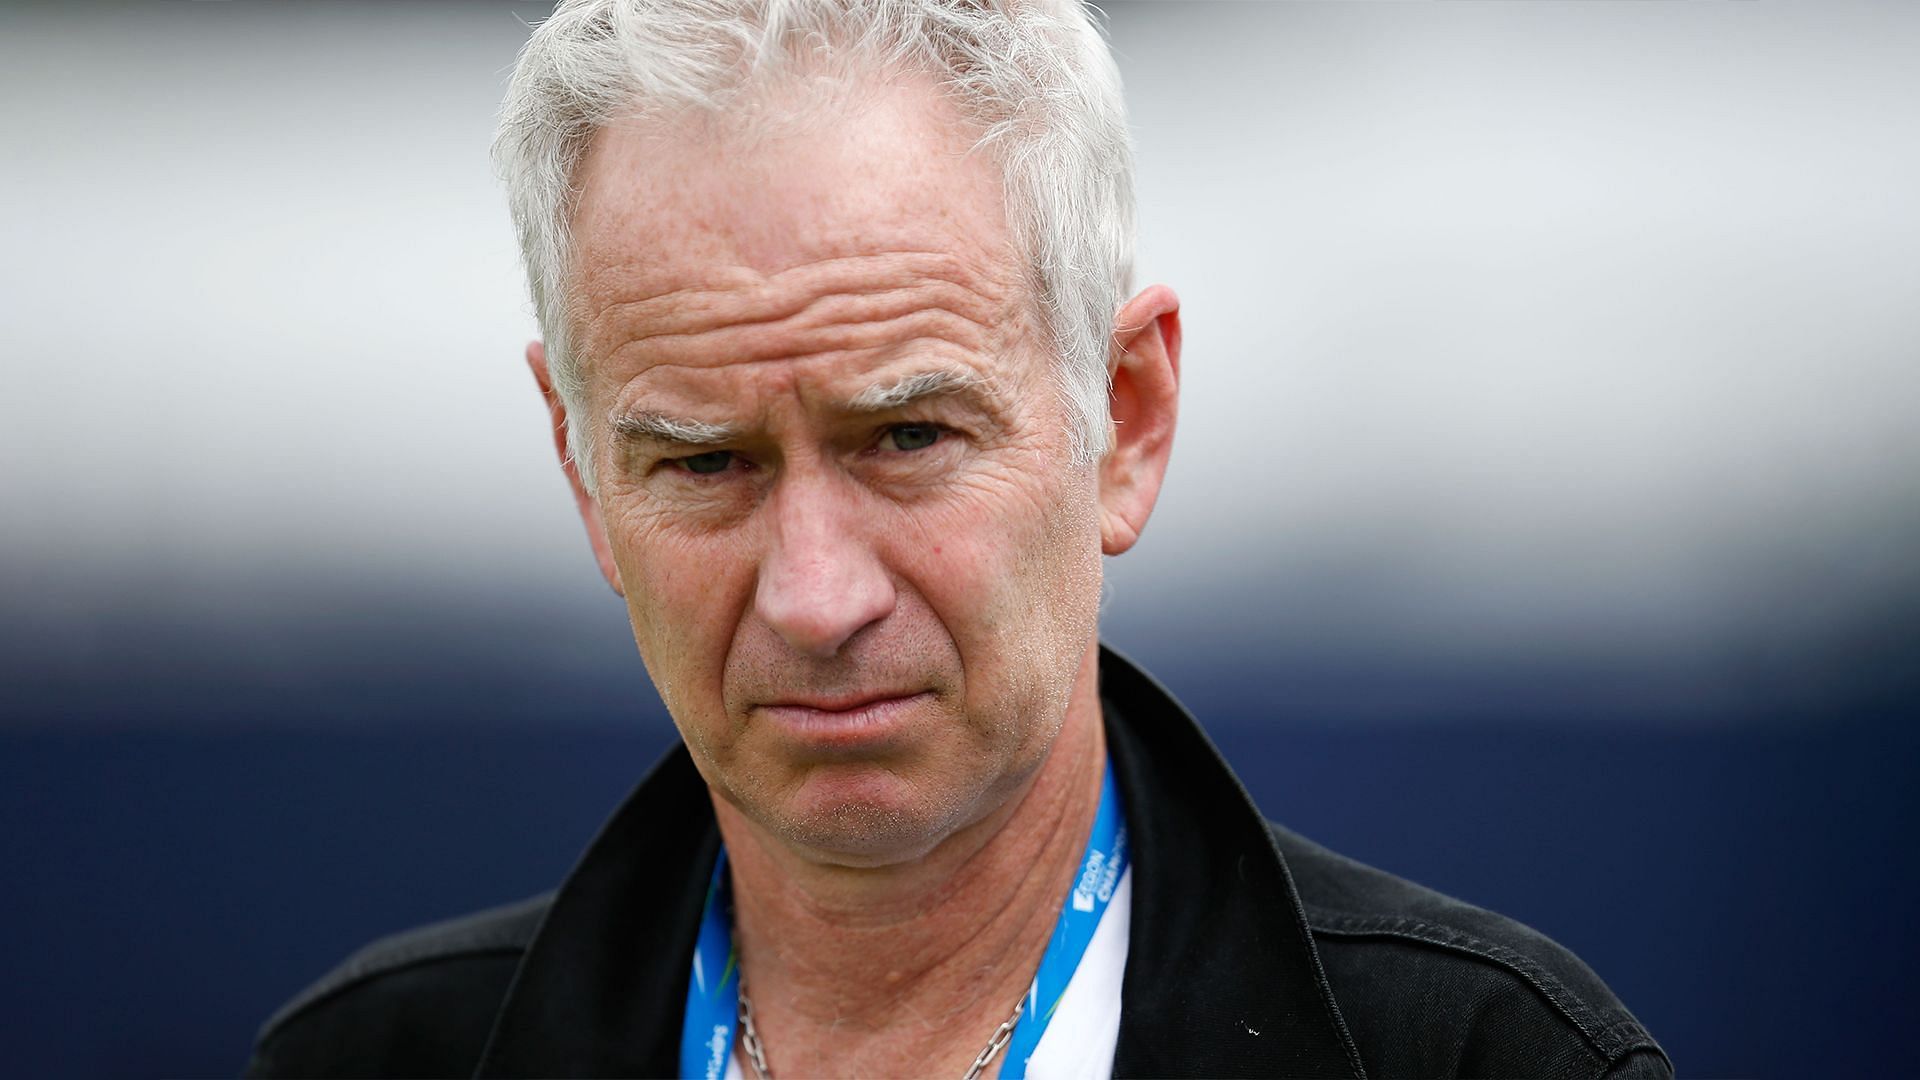 John McEnroe failed to win the French Open in his illustrious career